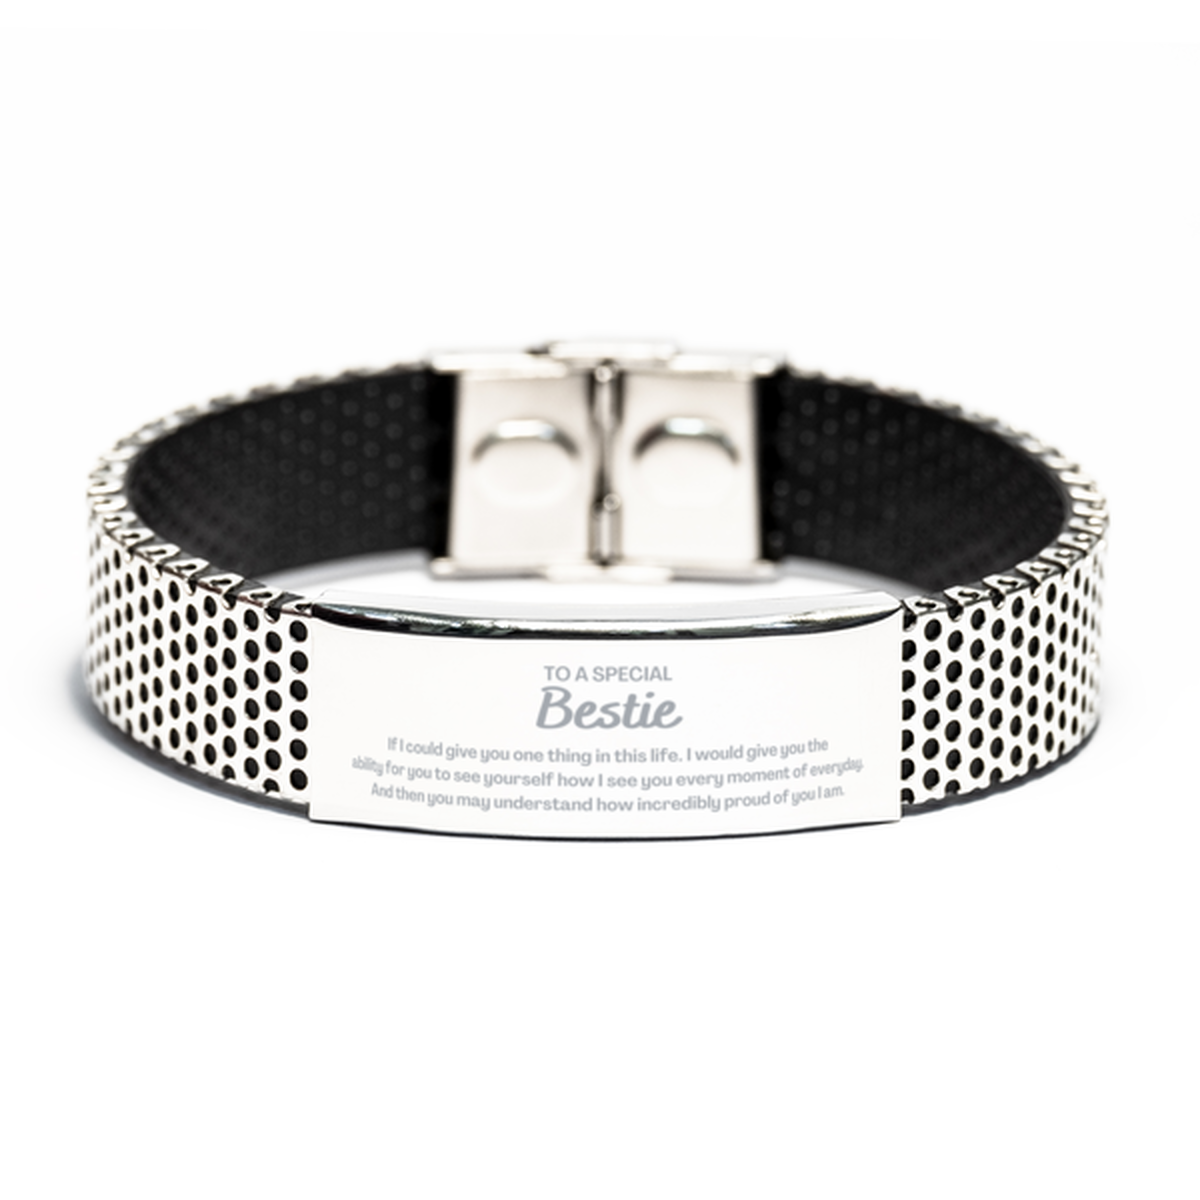 To My Bestie Stainless Steel Bracelet, Gifts For Bestie Engraved, Inspirational Gifts for Christmas Birthday, Epic Gifts for Bestie To A Special Bestie how incredibly proud of you I am